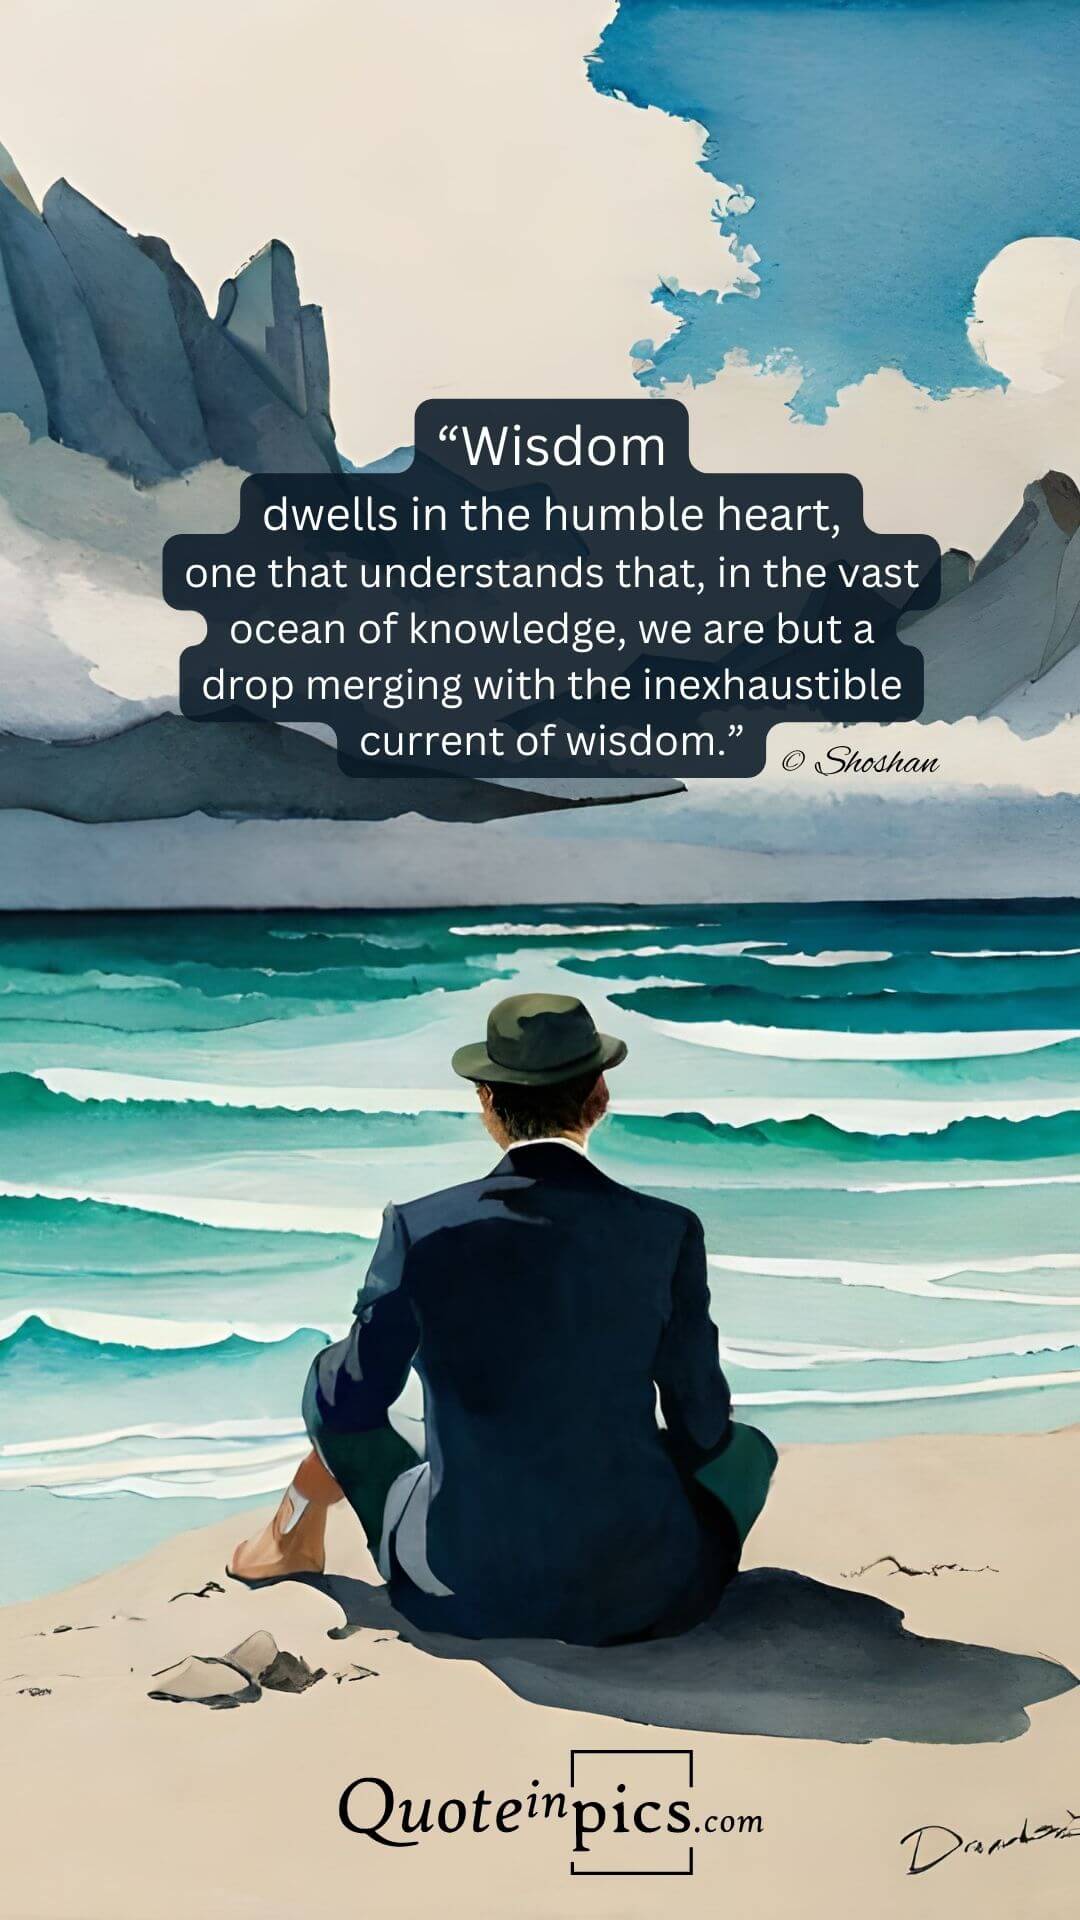 Embracing Wisdom: The Power of Humility in the Ocean of Knowledge